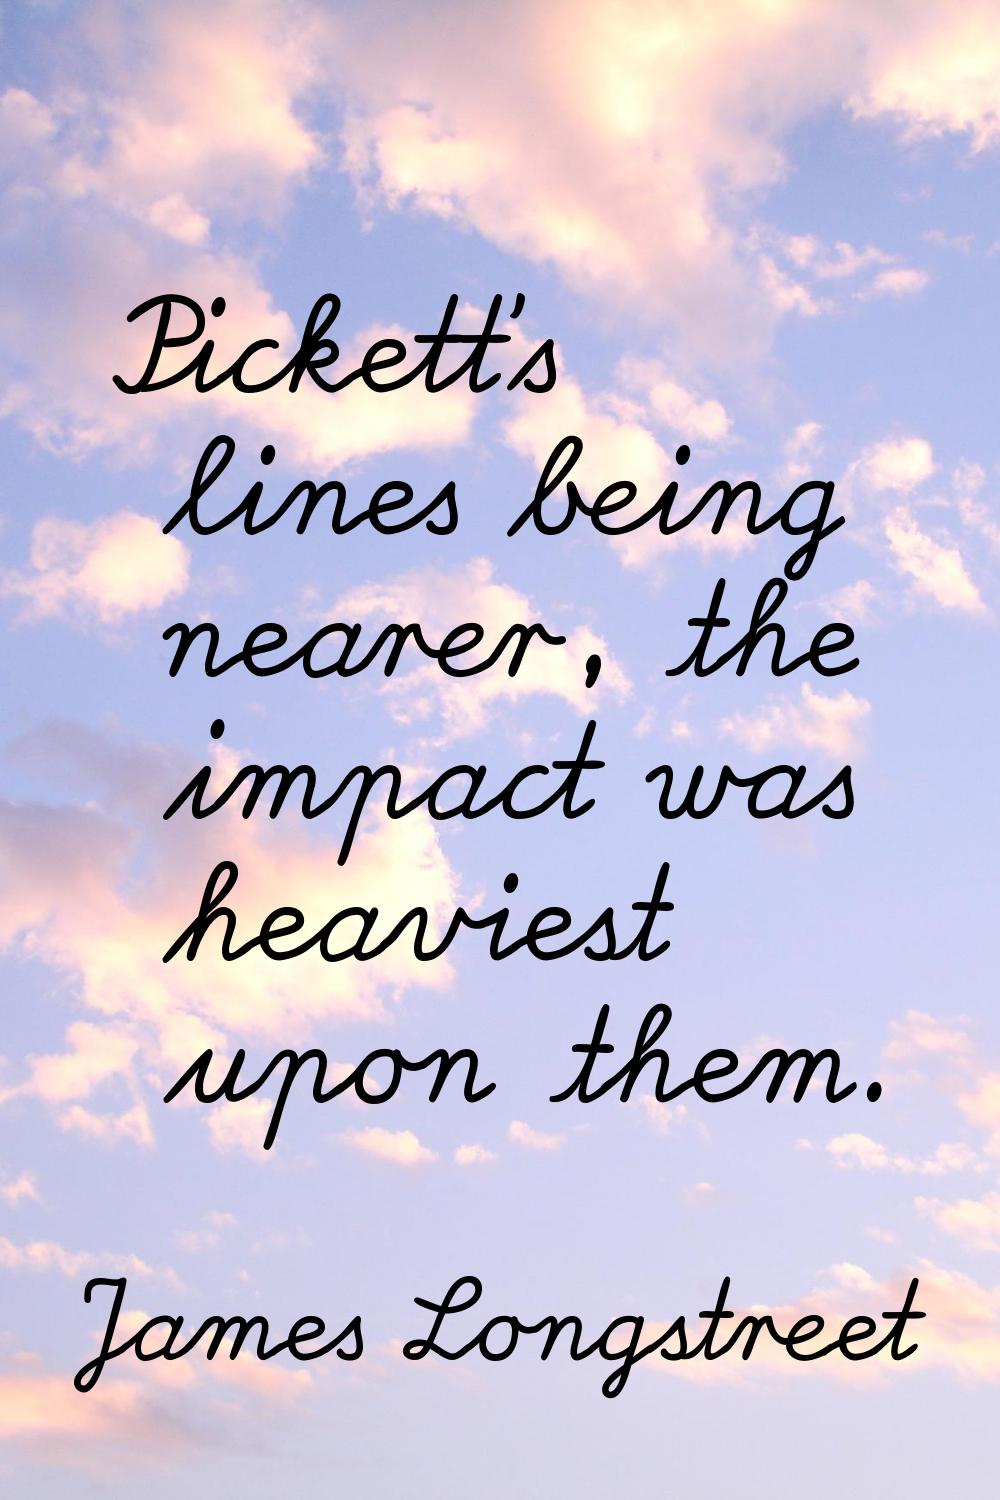 Pickett's lines being nearer, the impact was heaviest upon them.